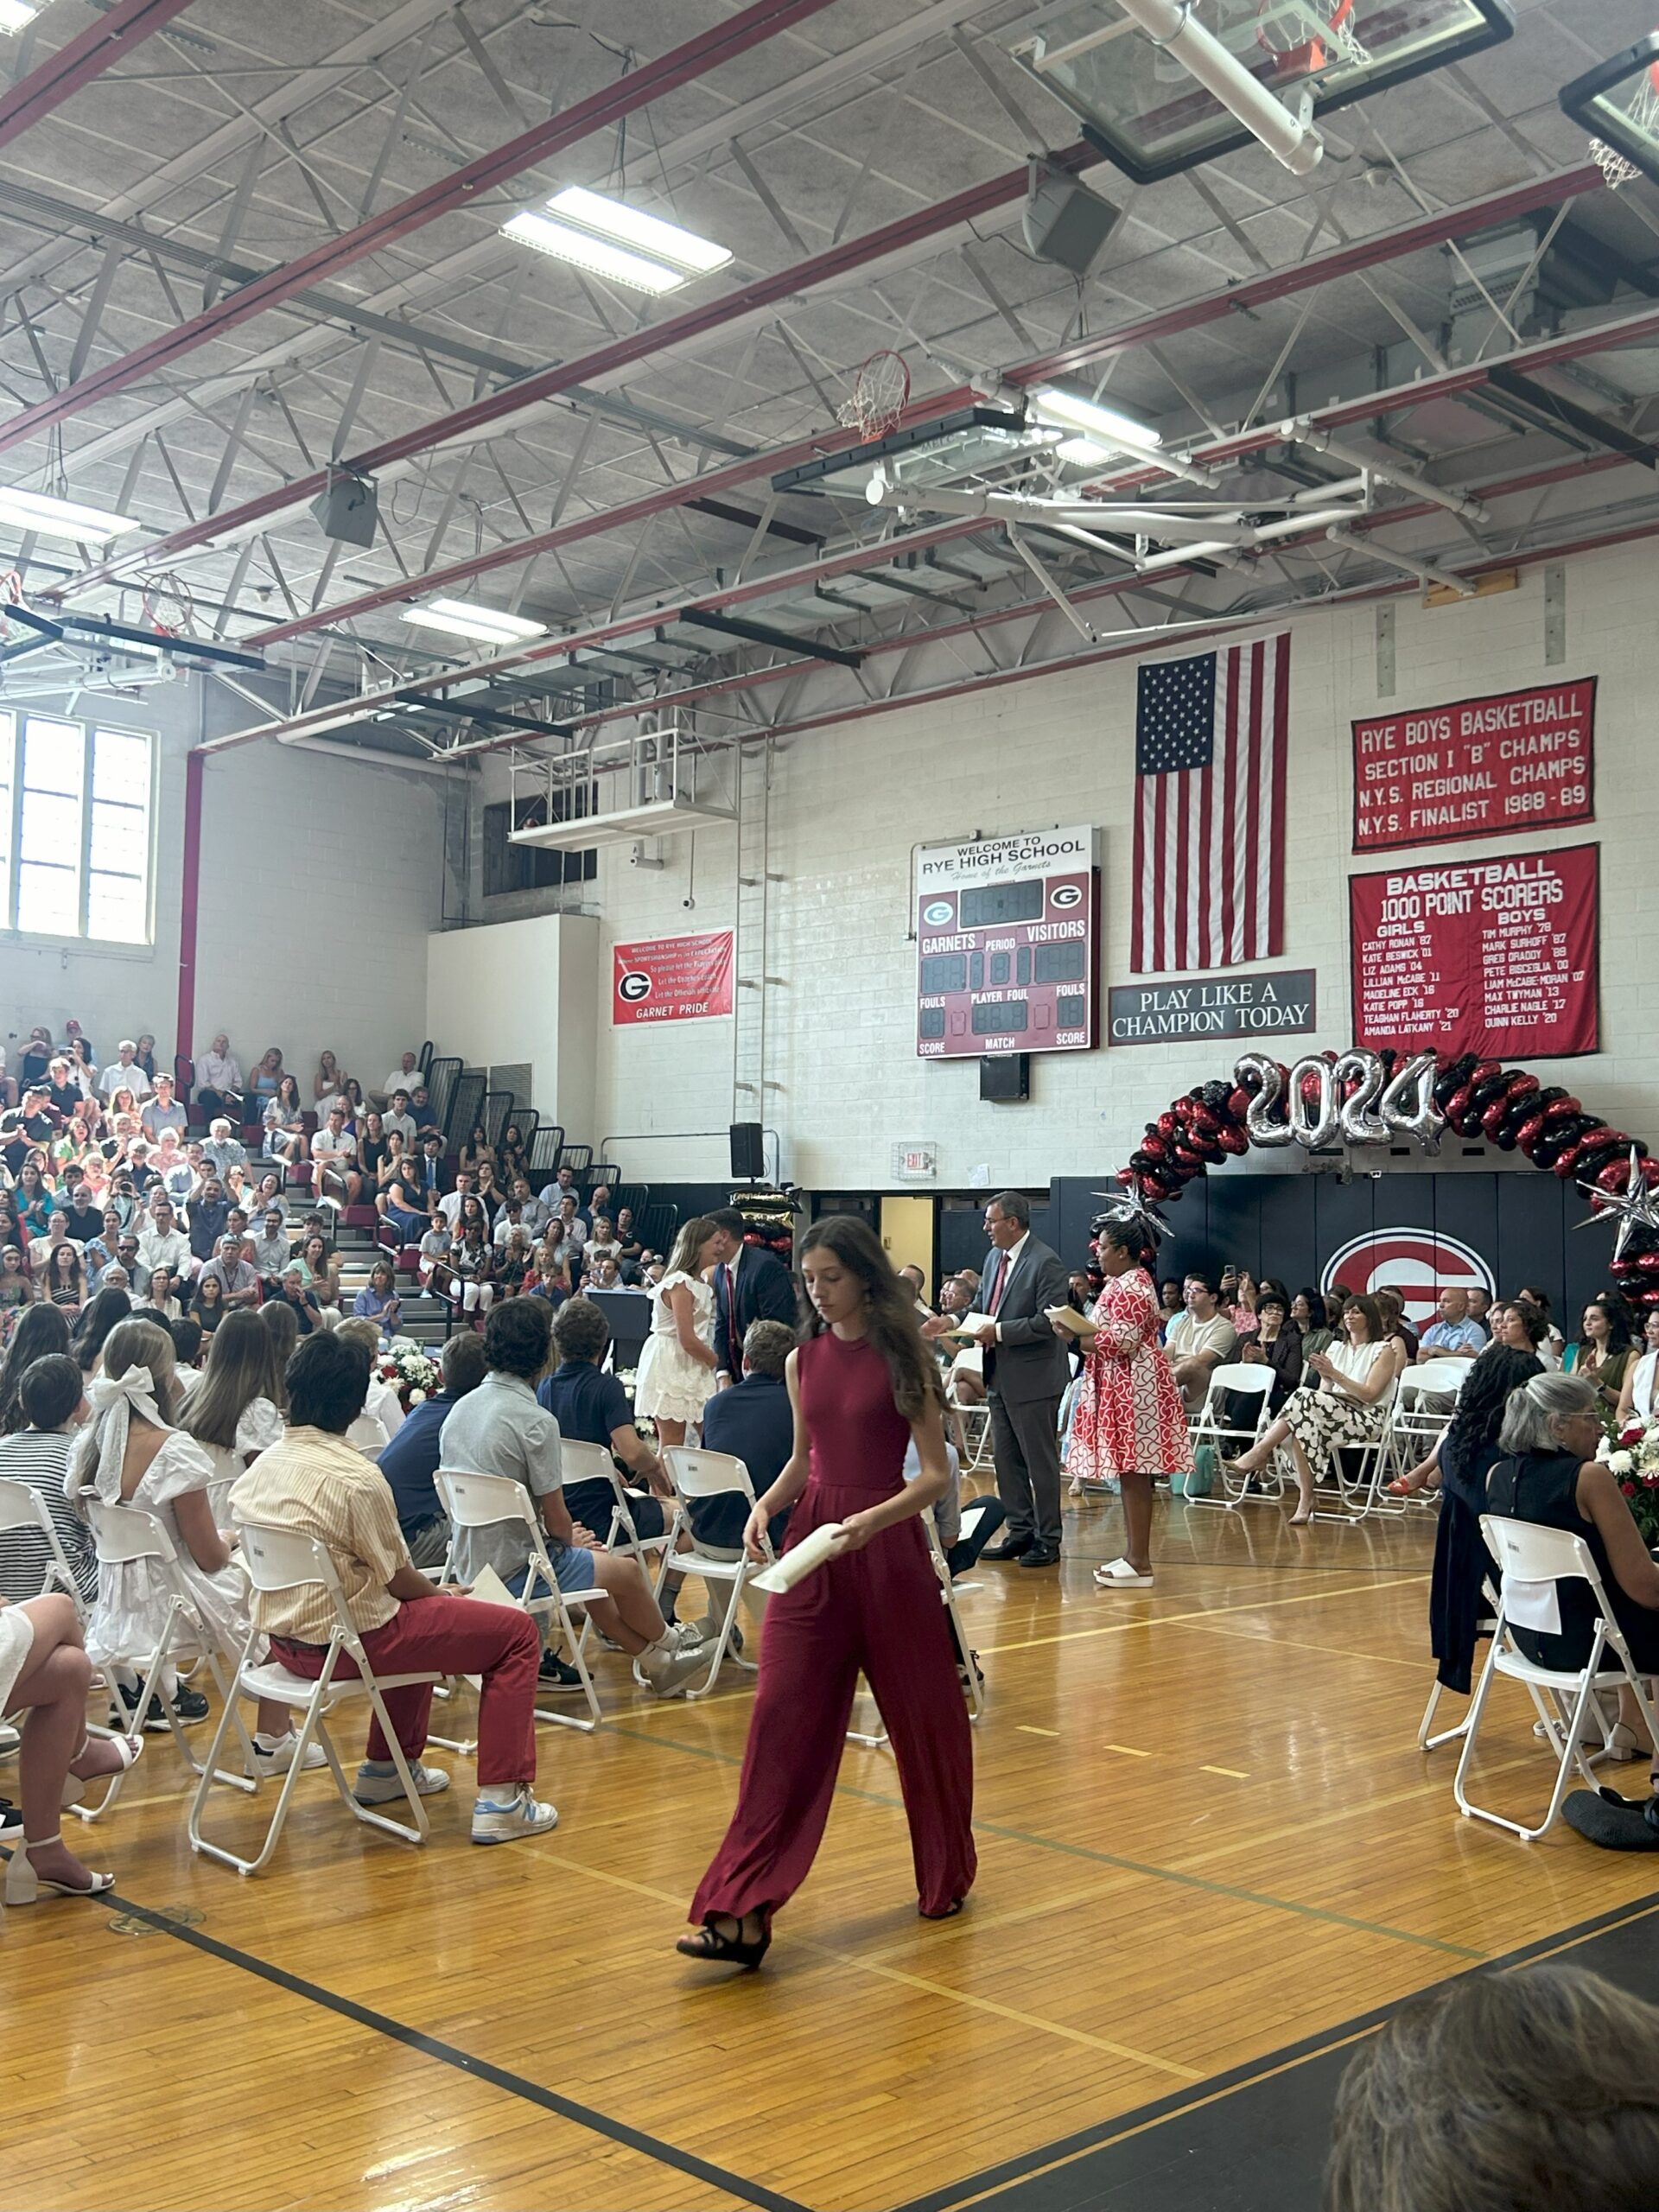 (PHOTO: The Rye Middle School Class of 2024 officially became the Class of 2028 at the Moving Up Ceremony on Tuesday, June 25.)